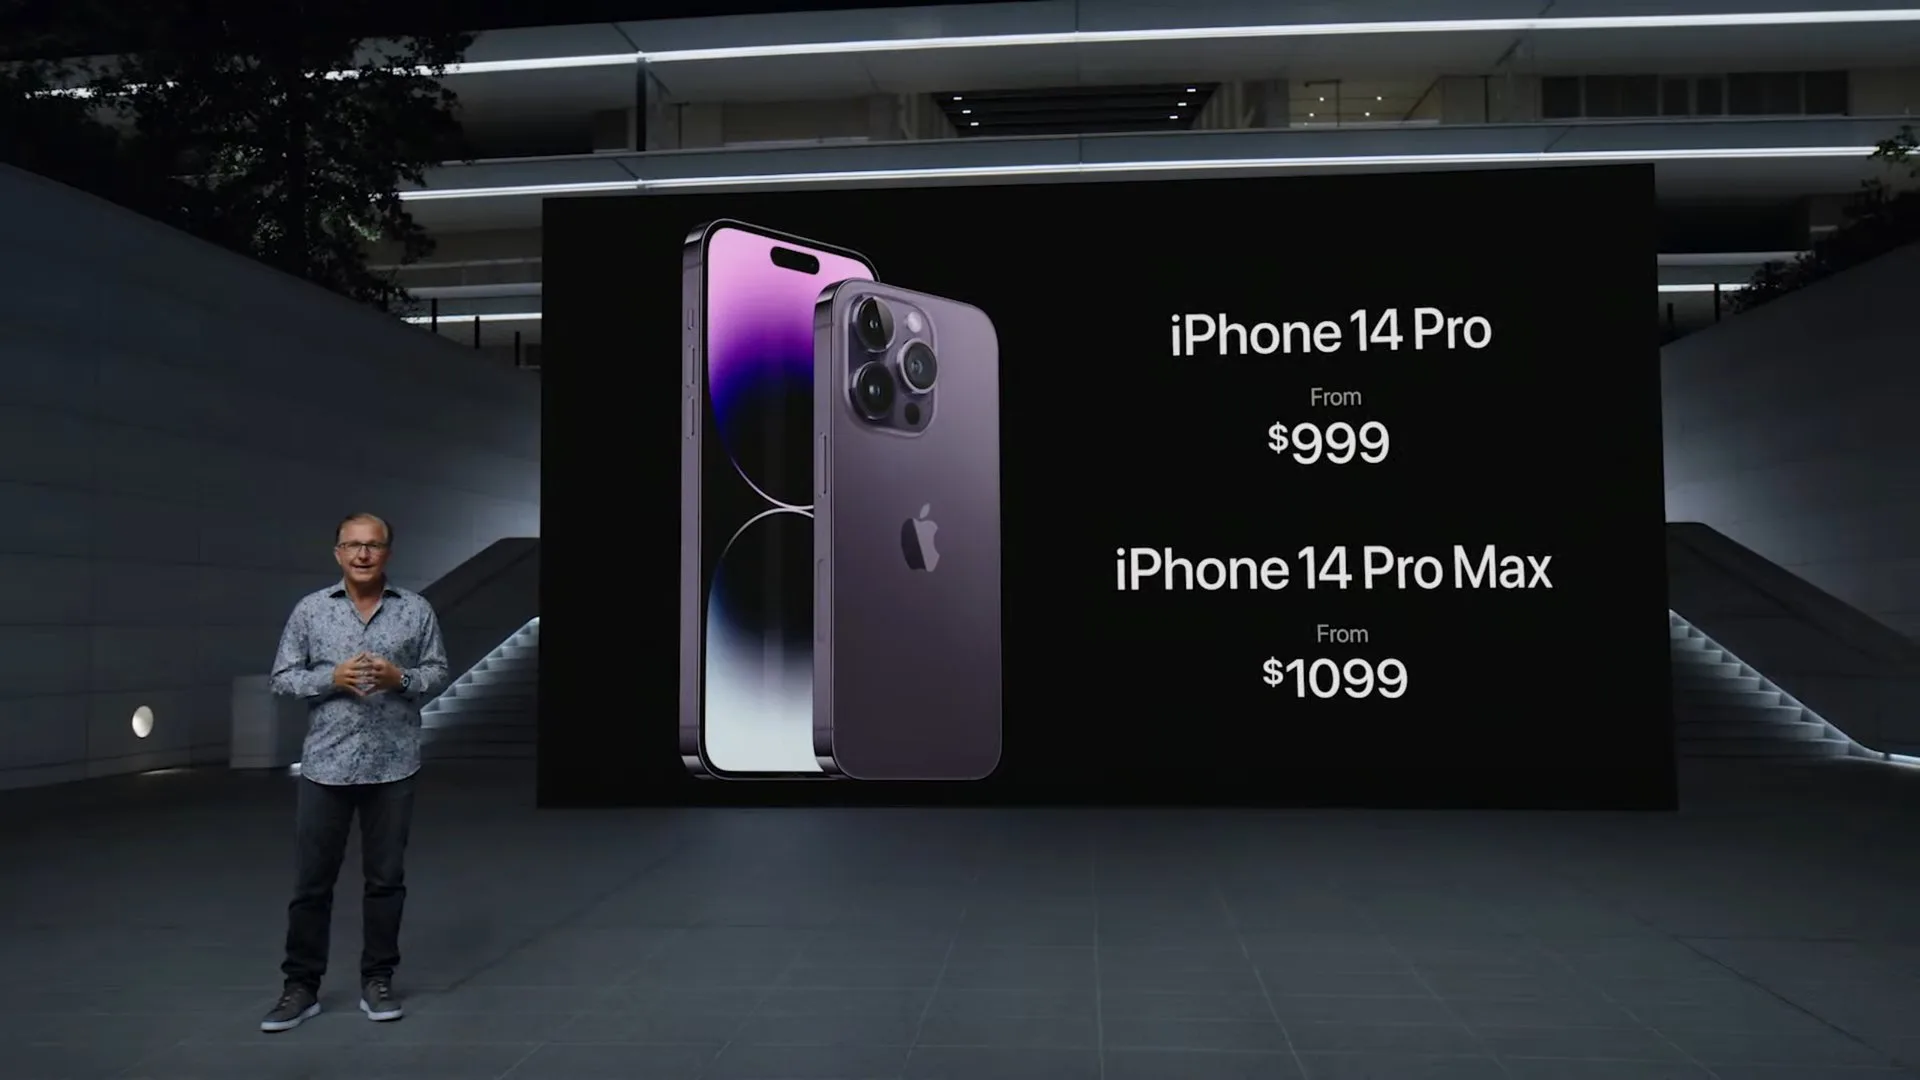 new PTA taxes on iPhone 14 Pro and 14 Pro Max